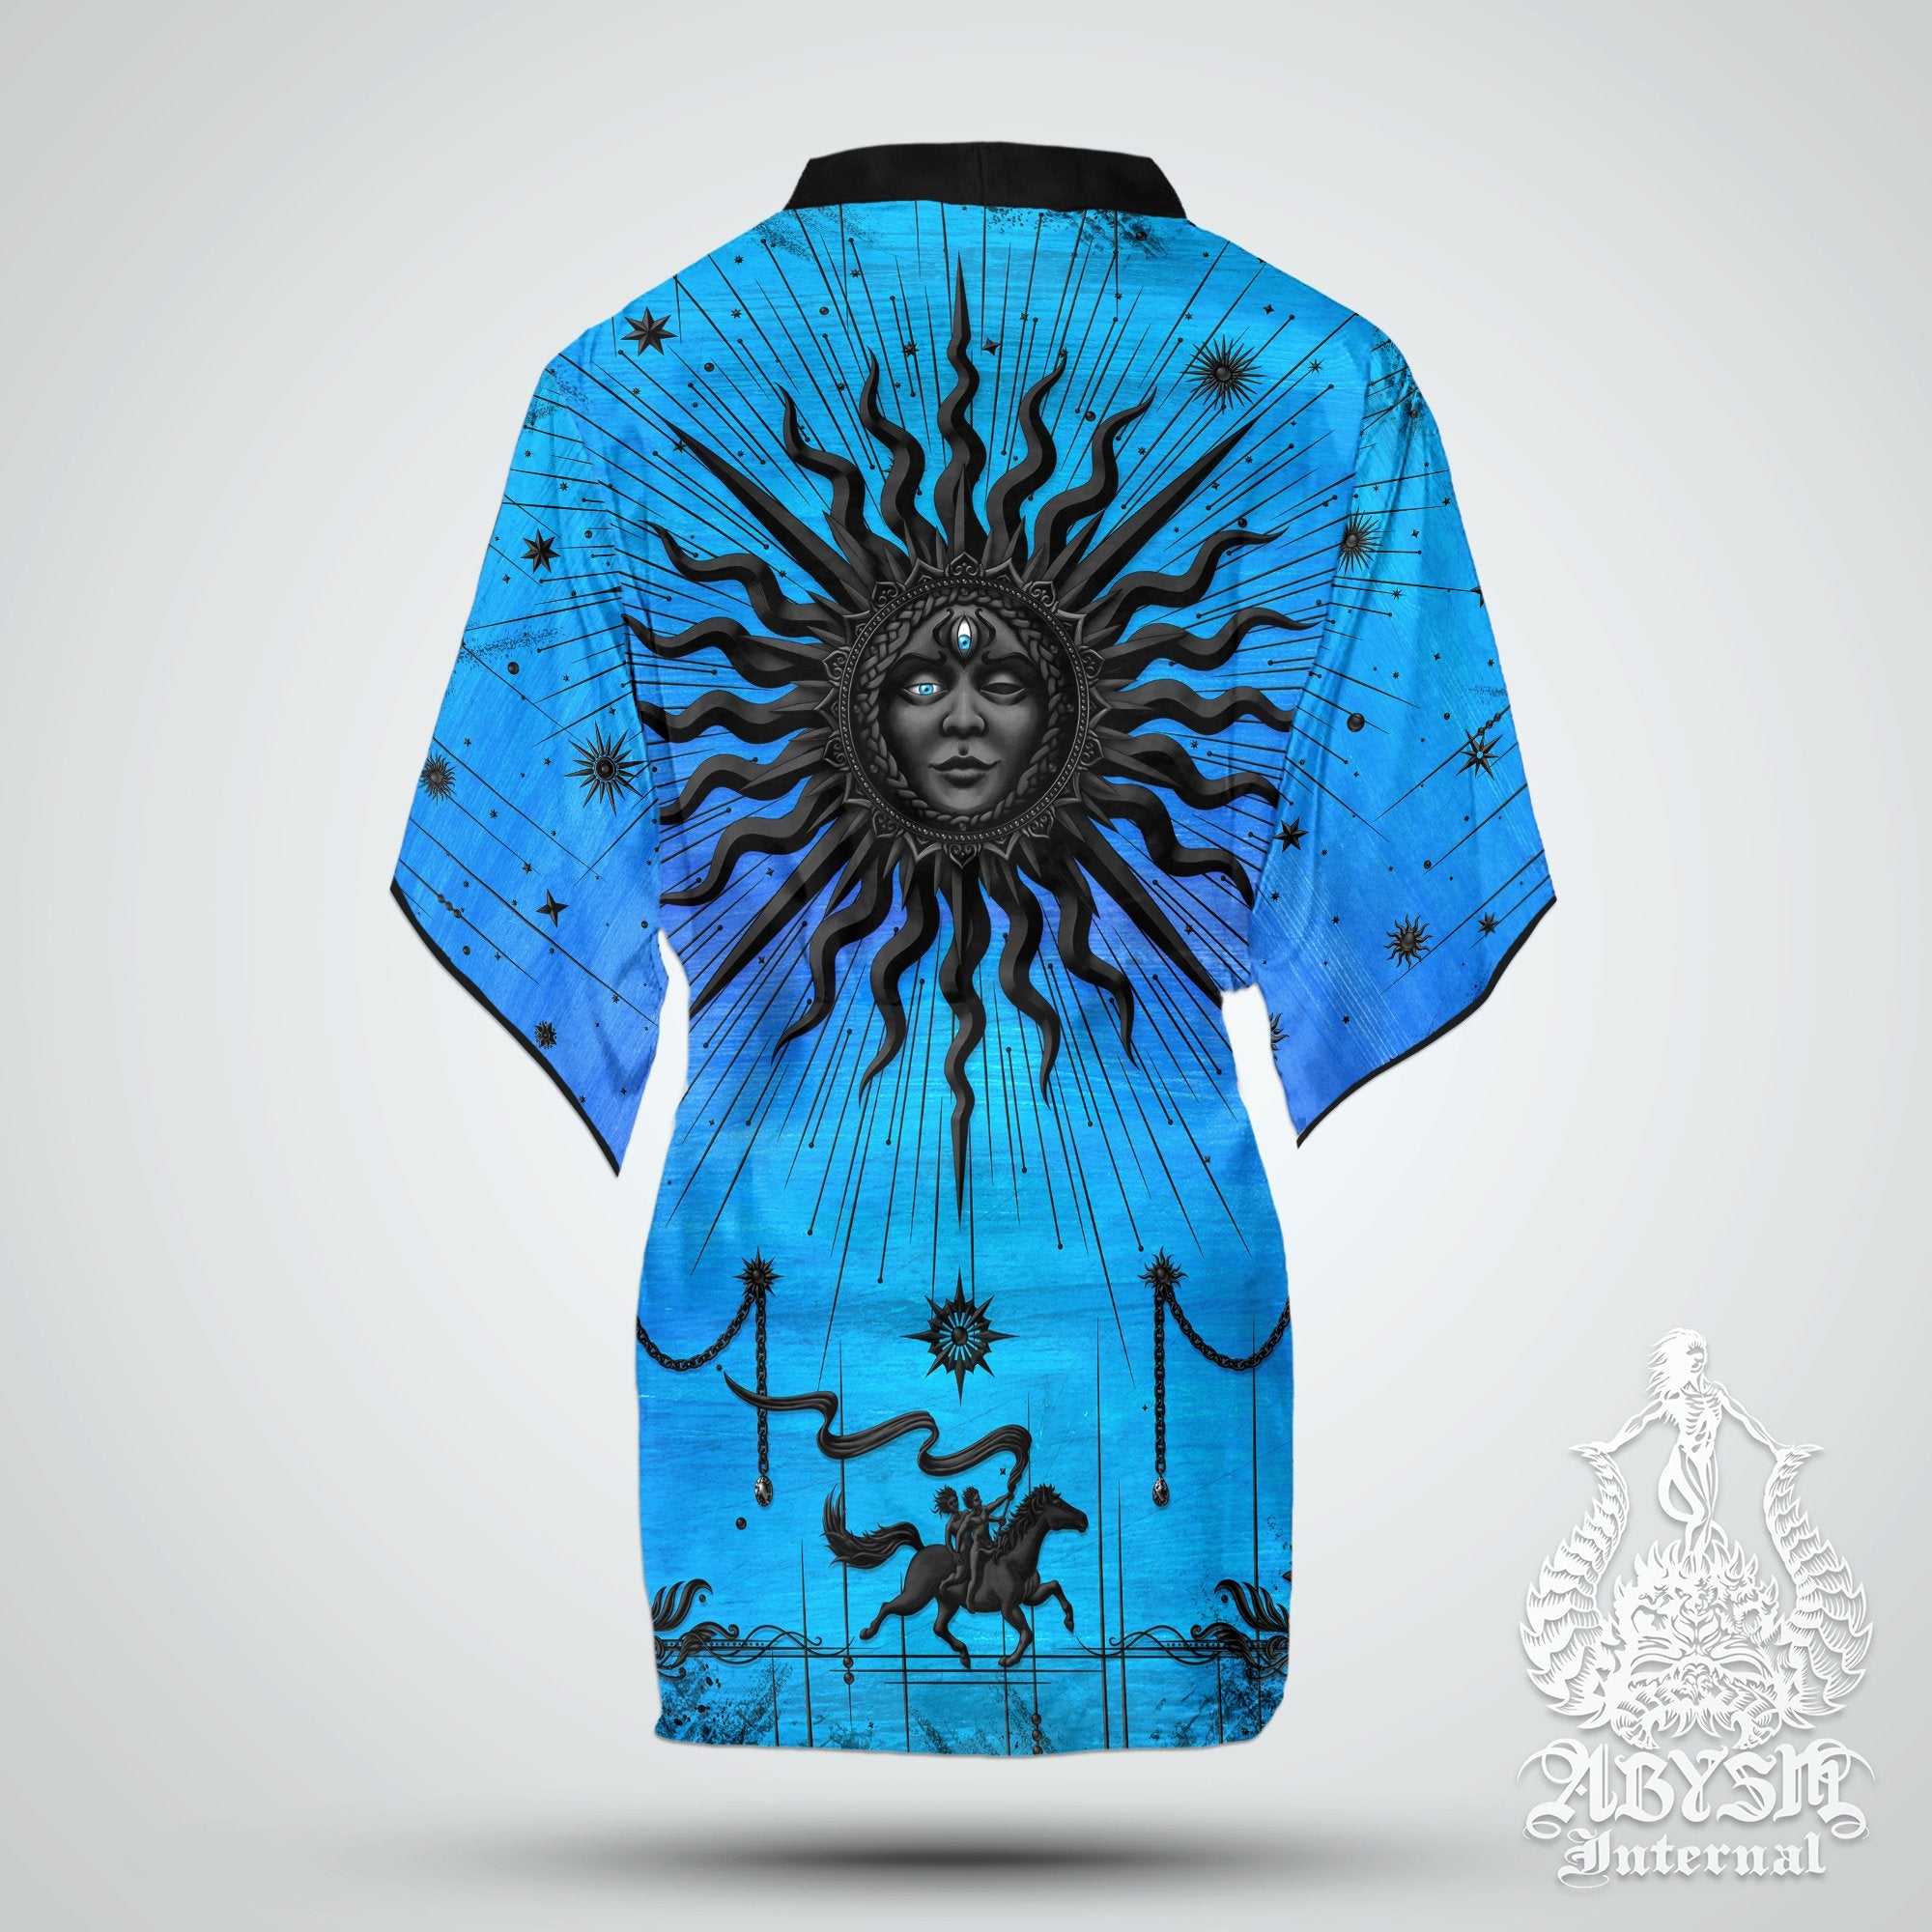 The Sun Short Kimono Robe, Witch Beach Party Outfit, Tarot Arcana Coverup, Pagan Summer Festival, Witchy Clothing, Unisex - Cyan and Black - Abysm Internal